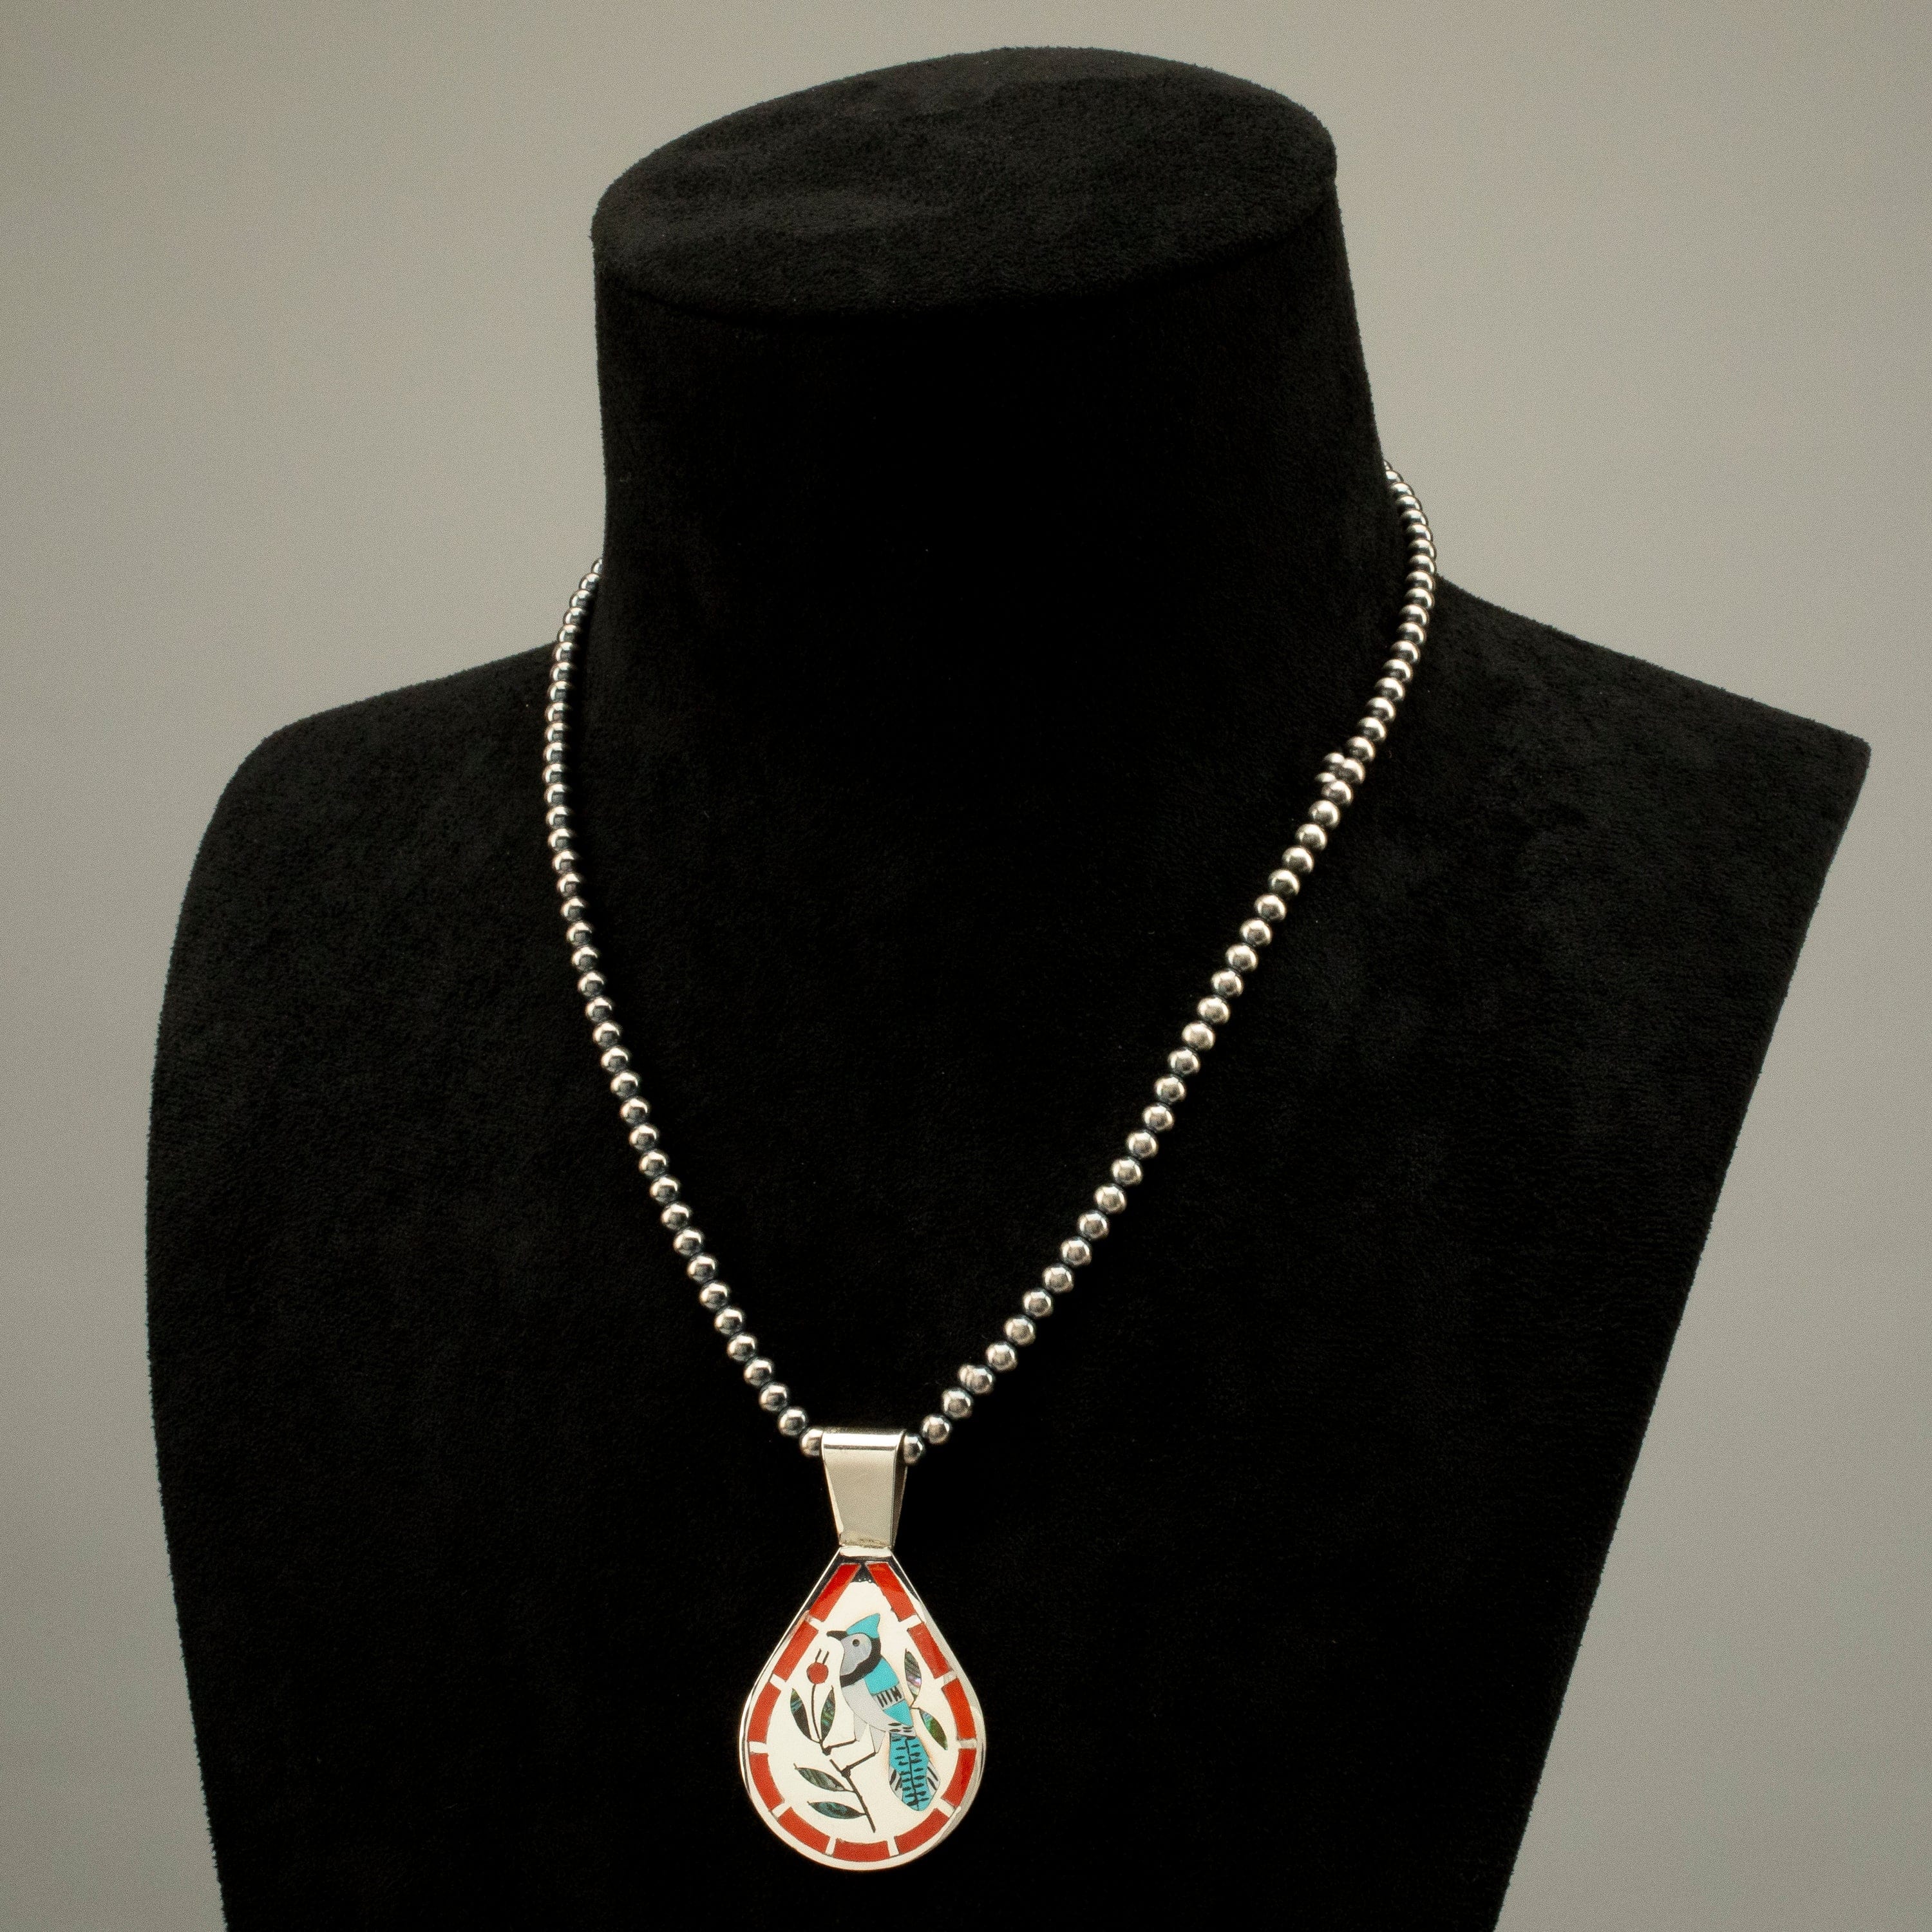 Kalifano Native American Jewelry 18" Dennis & Nancy Edaakie Mutli Gem Blue Jay Zuni Inlay Pendant with 4mm Navajo Pearl Necklace USA Native American Made 925 Sterling Silver NAN1500.014